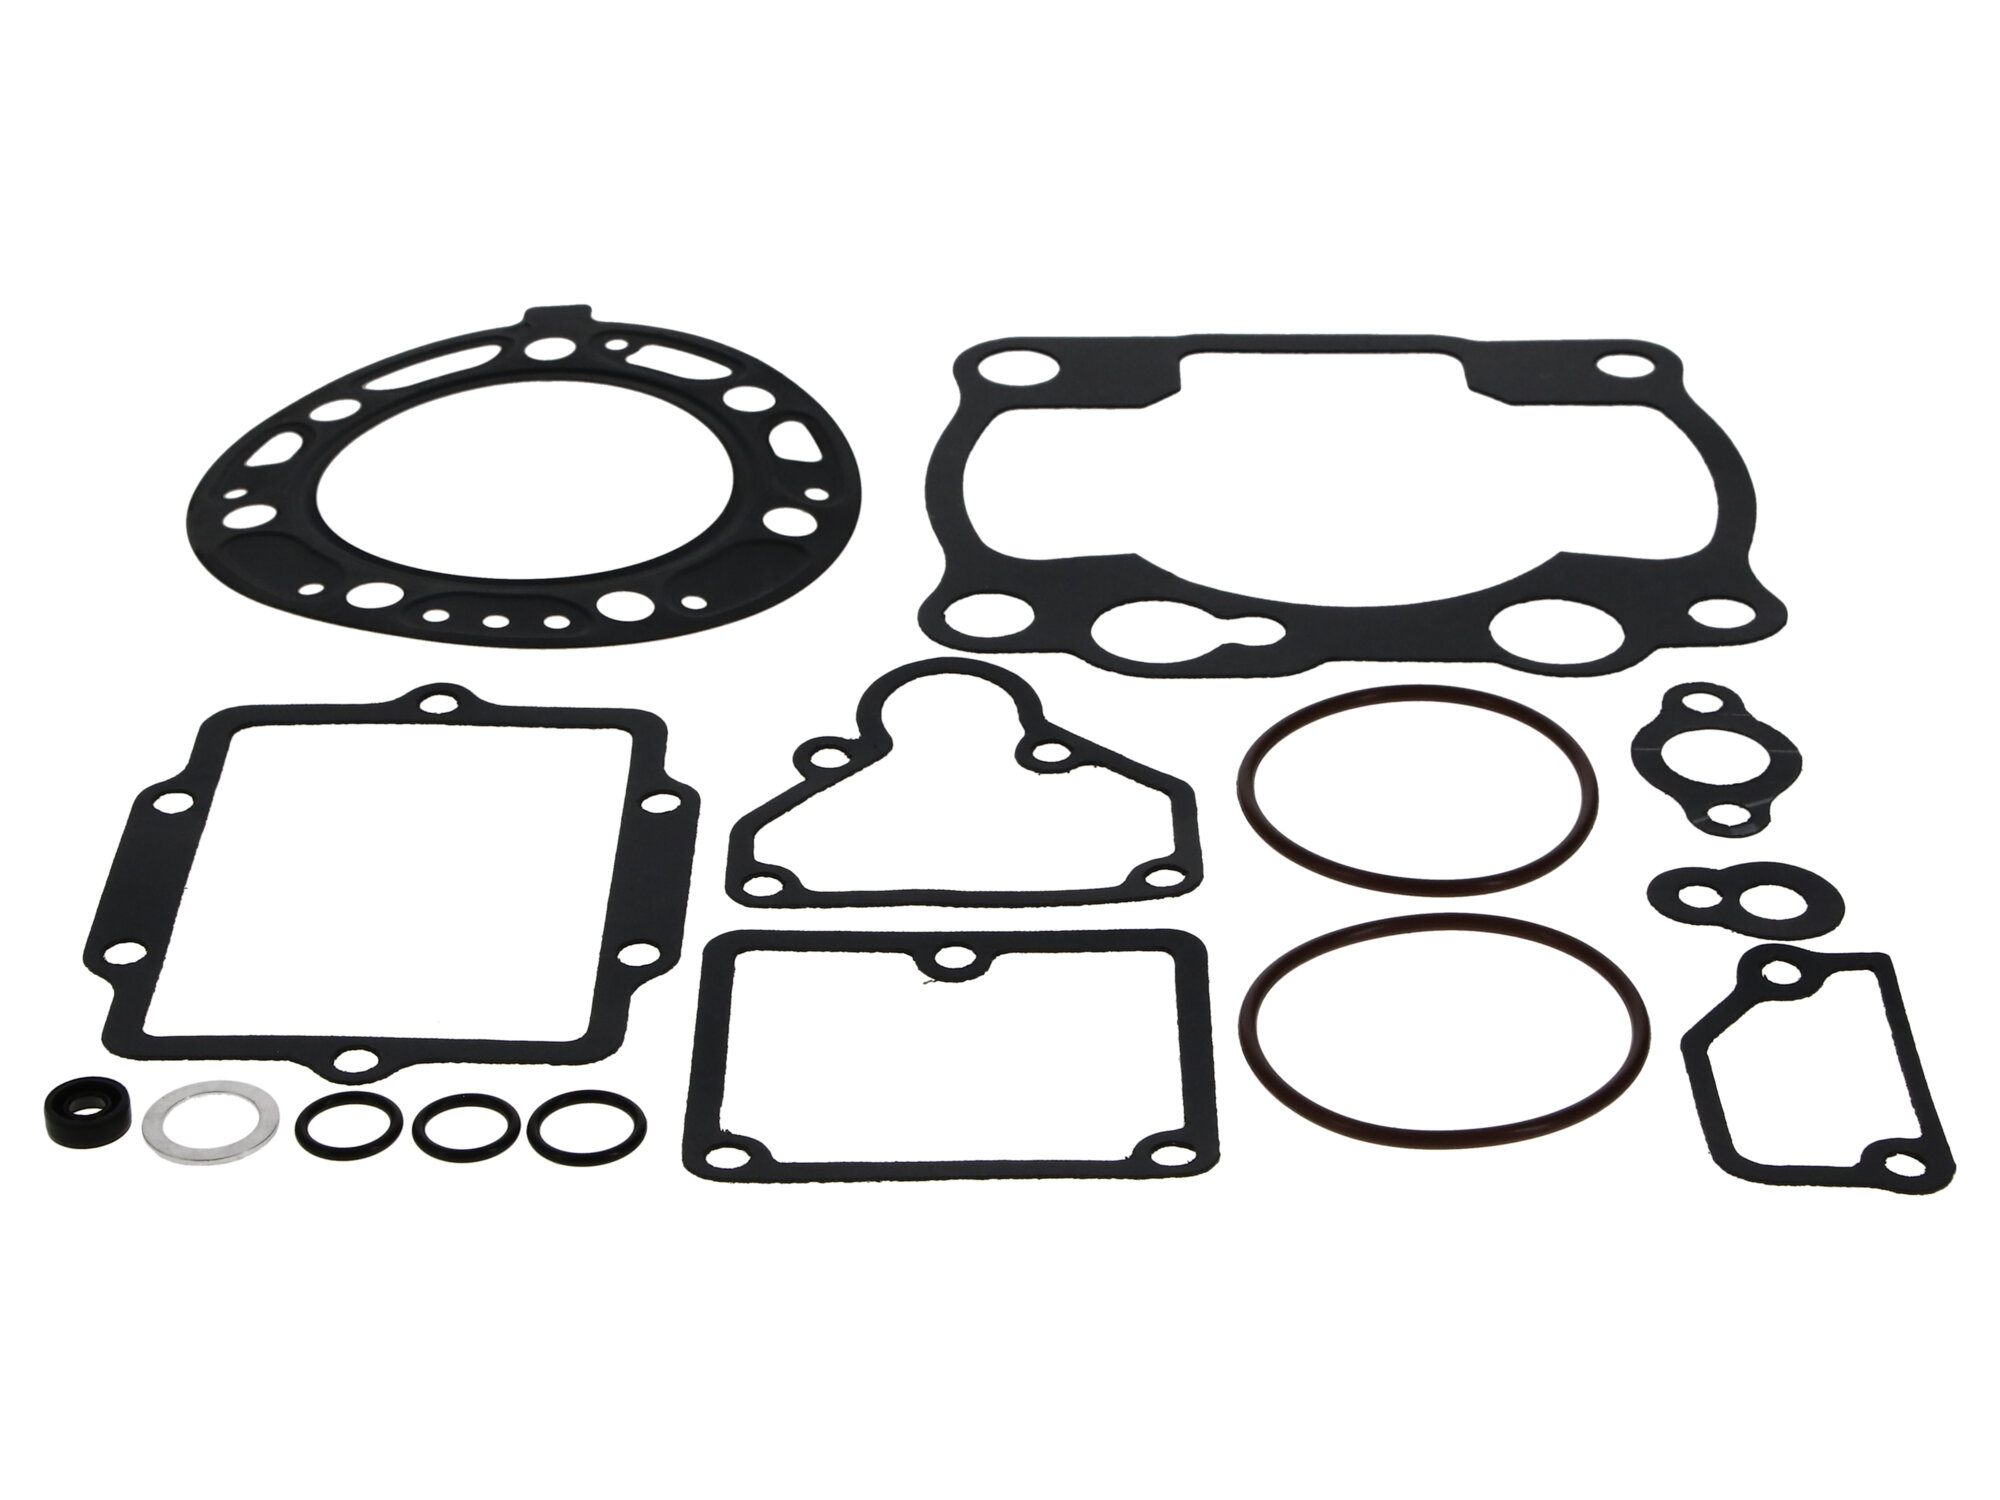 Shop High Quality Wiseco Top End Gasket Kit Top End Gasket Kits - Wiseco  SKU W5741